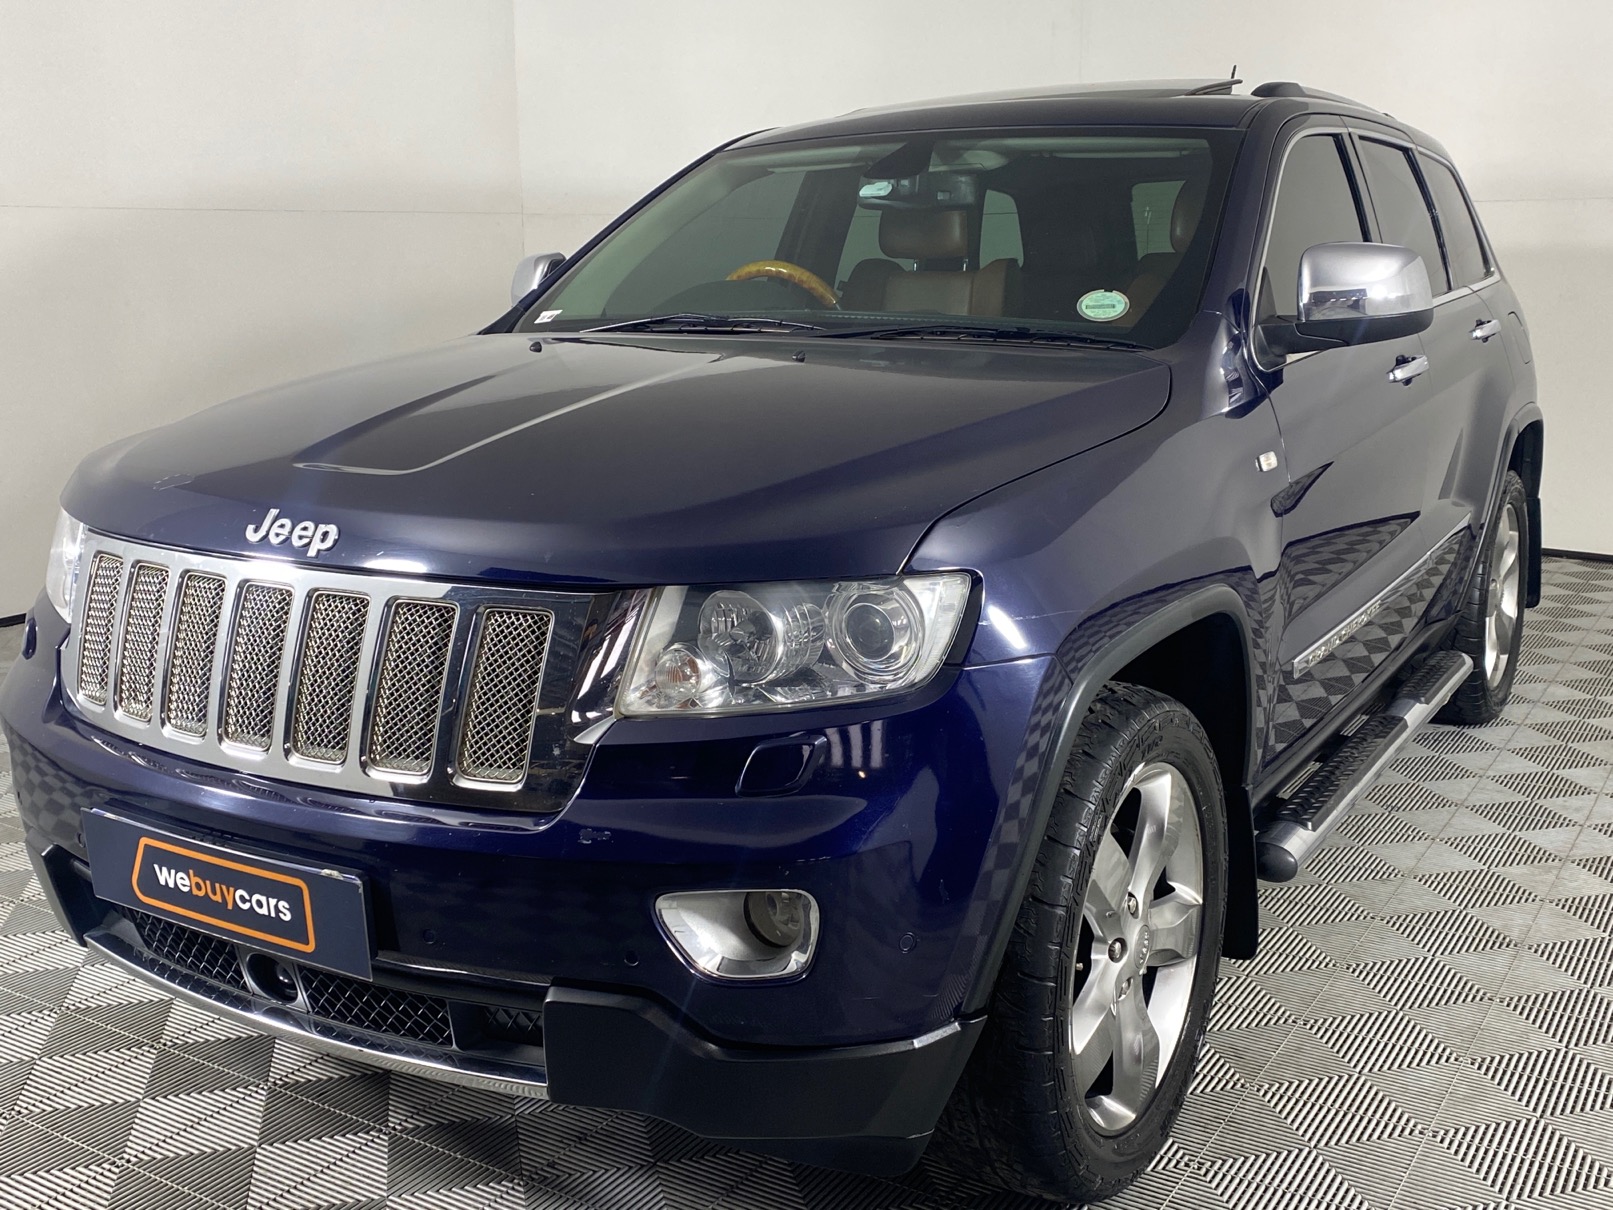 Used 2014 Jeep Grand Cherokee 3.6 Limited for sale WeBuyCars